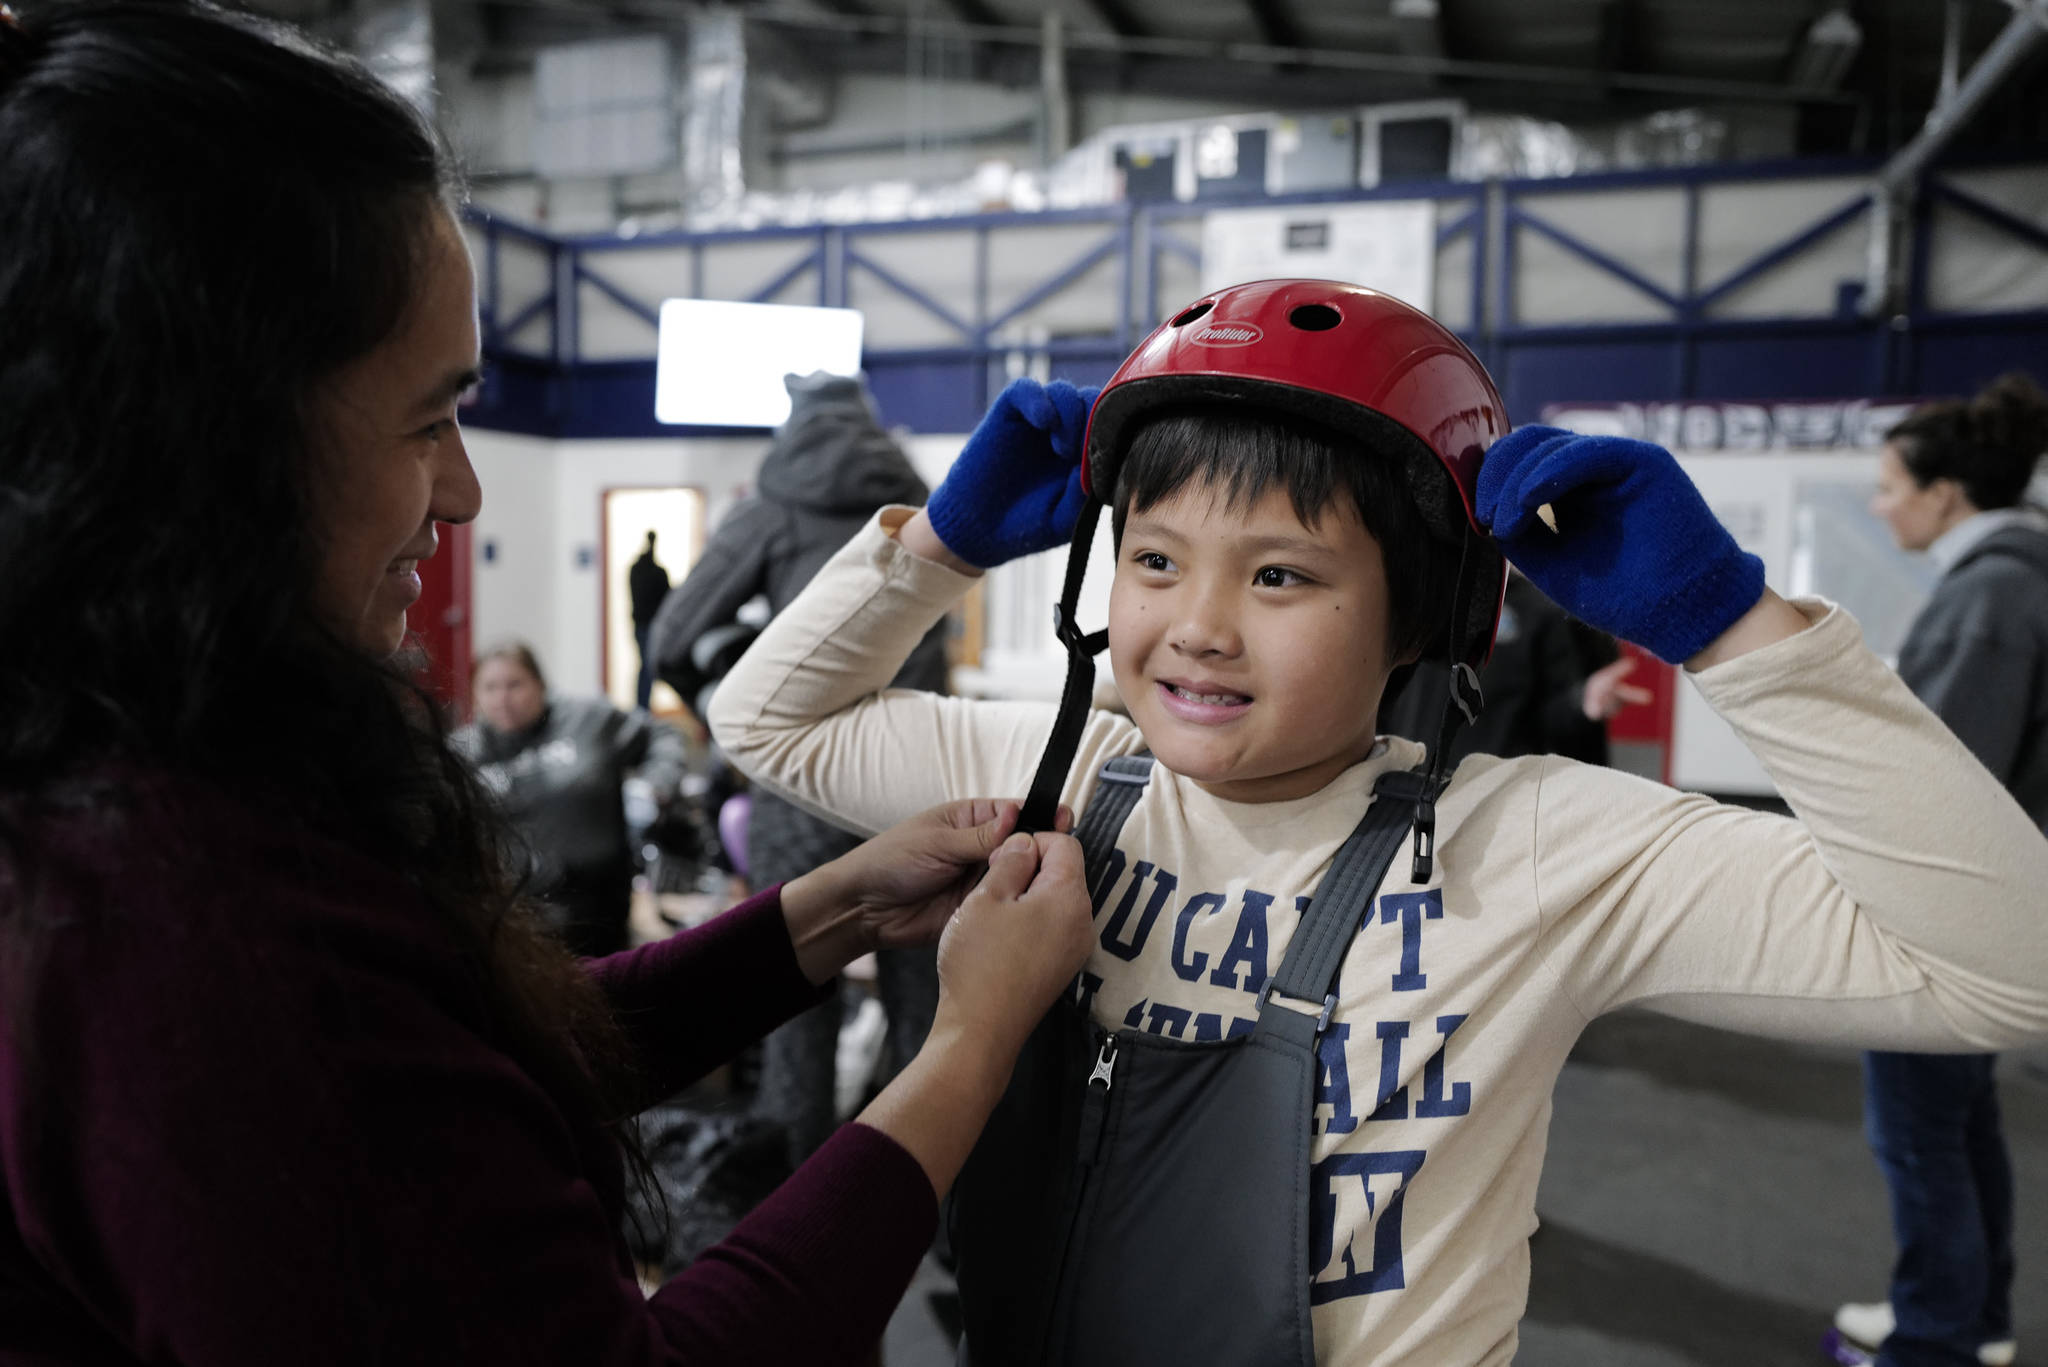 Hazel Yadao adjusts a helmet for her son, Arnold, 9, during a free skate on the opening day at the Treadwell Arena on Monday, Aug. 5, 2019. (Michael Penn | Juneau Empire)